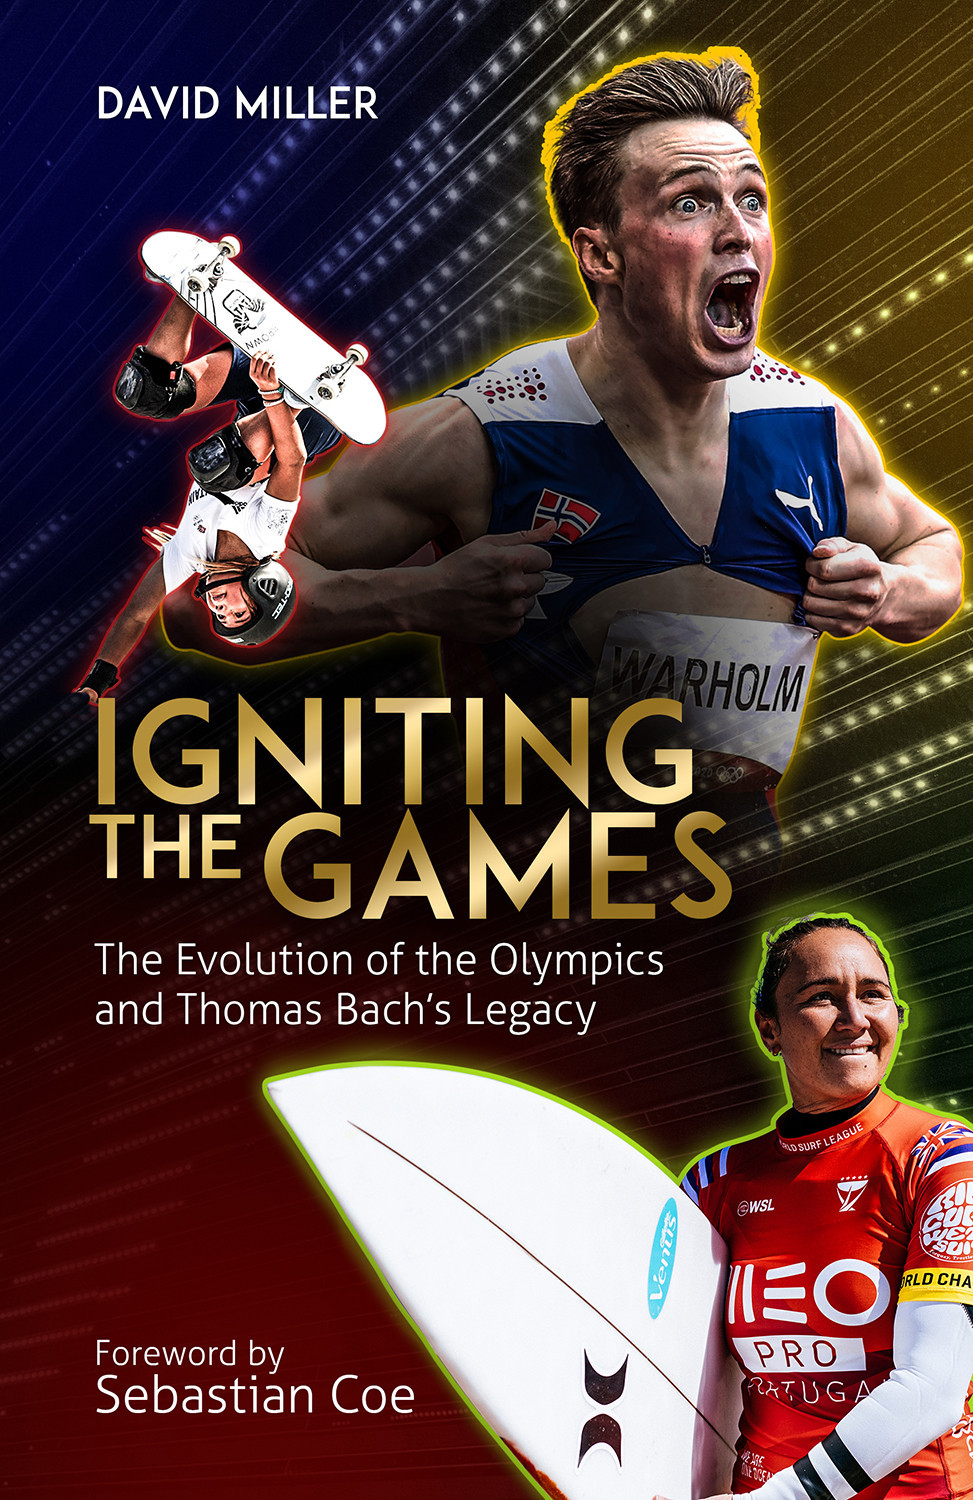 David Miller had previously written biographies of Olympic personalities such as former President Juan Antonio Samaranch, prominent South Korean official Kim Un-Yong and Sebastian Coe ©Pitch Publishing